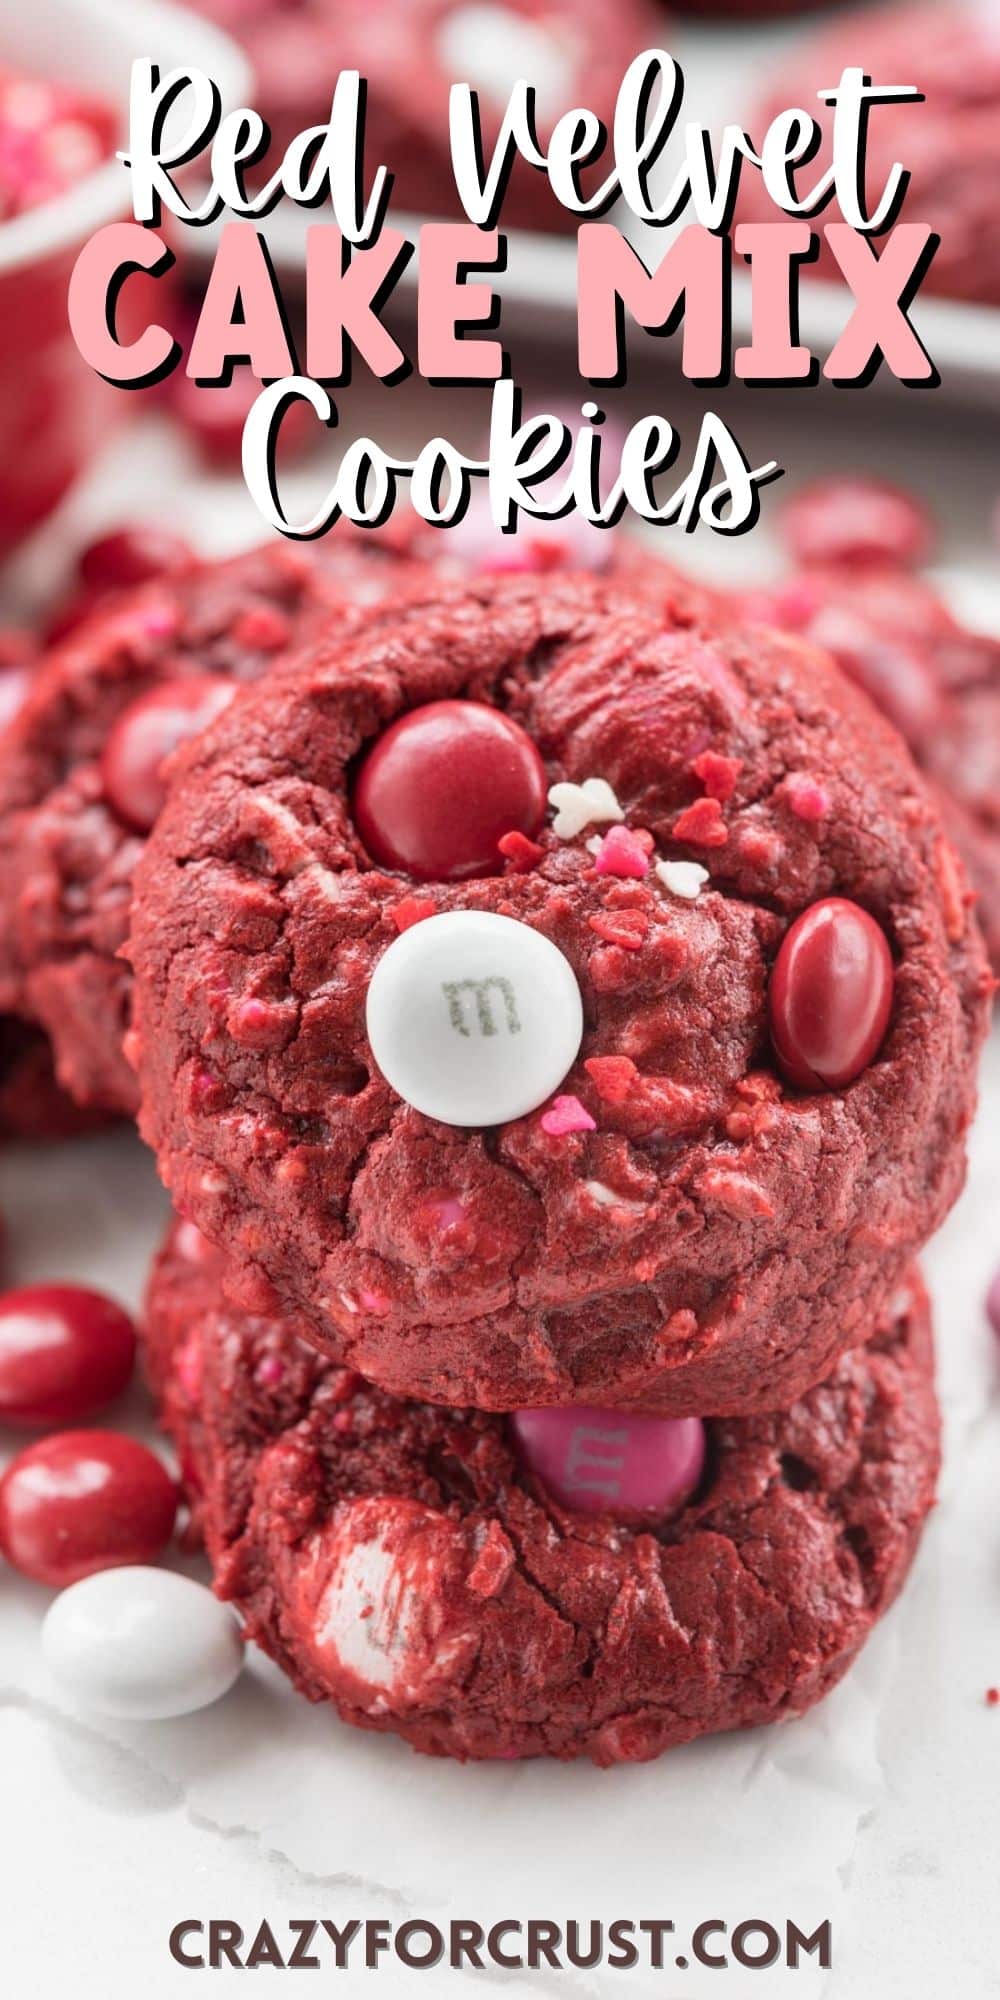 red cookies with red and white m&ms baked in and words on the image